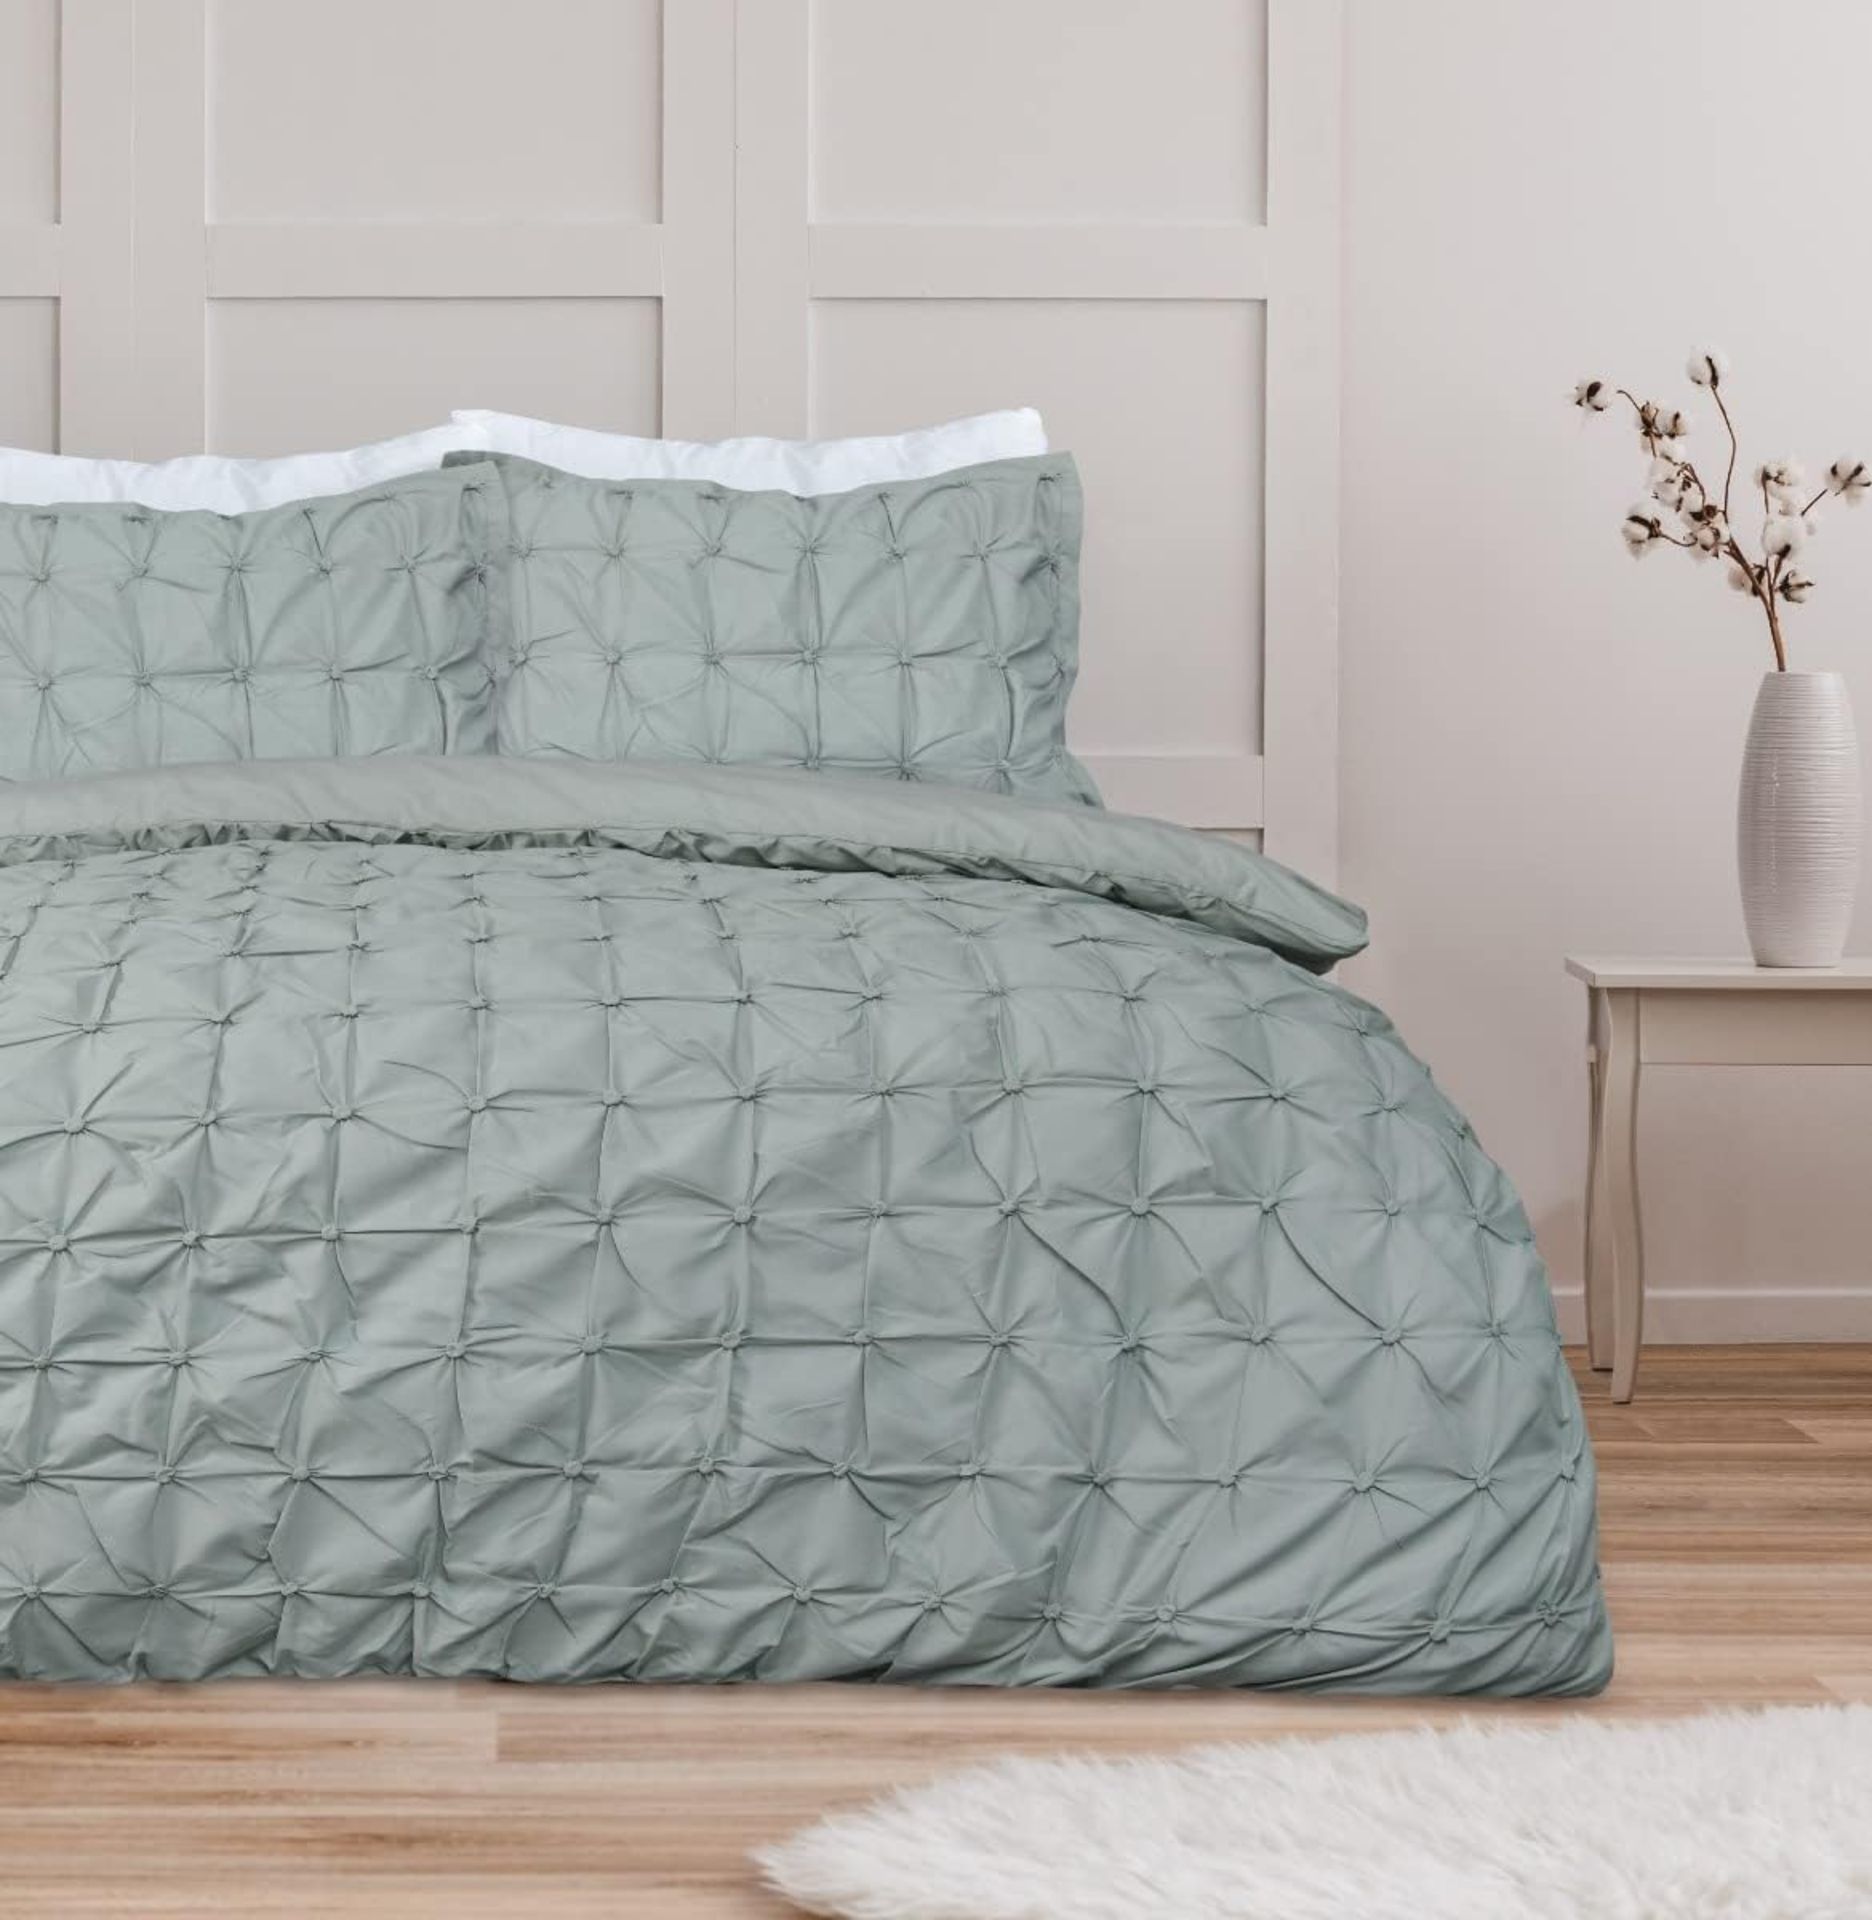 11x NEW & PACKAGED SLEEPDOWN Rouched Easy Care SINGLE Duvet Set - SAGE GREEN. RRP £22.99 EACH. (R7- - Image 2 of 4